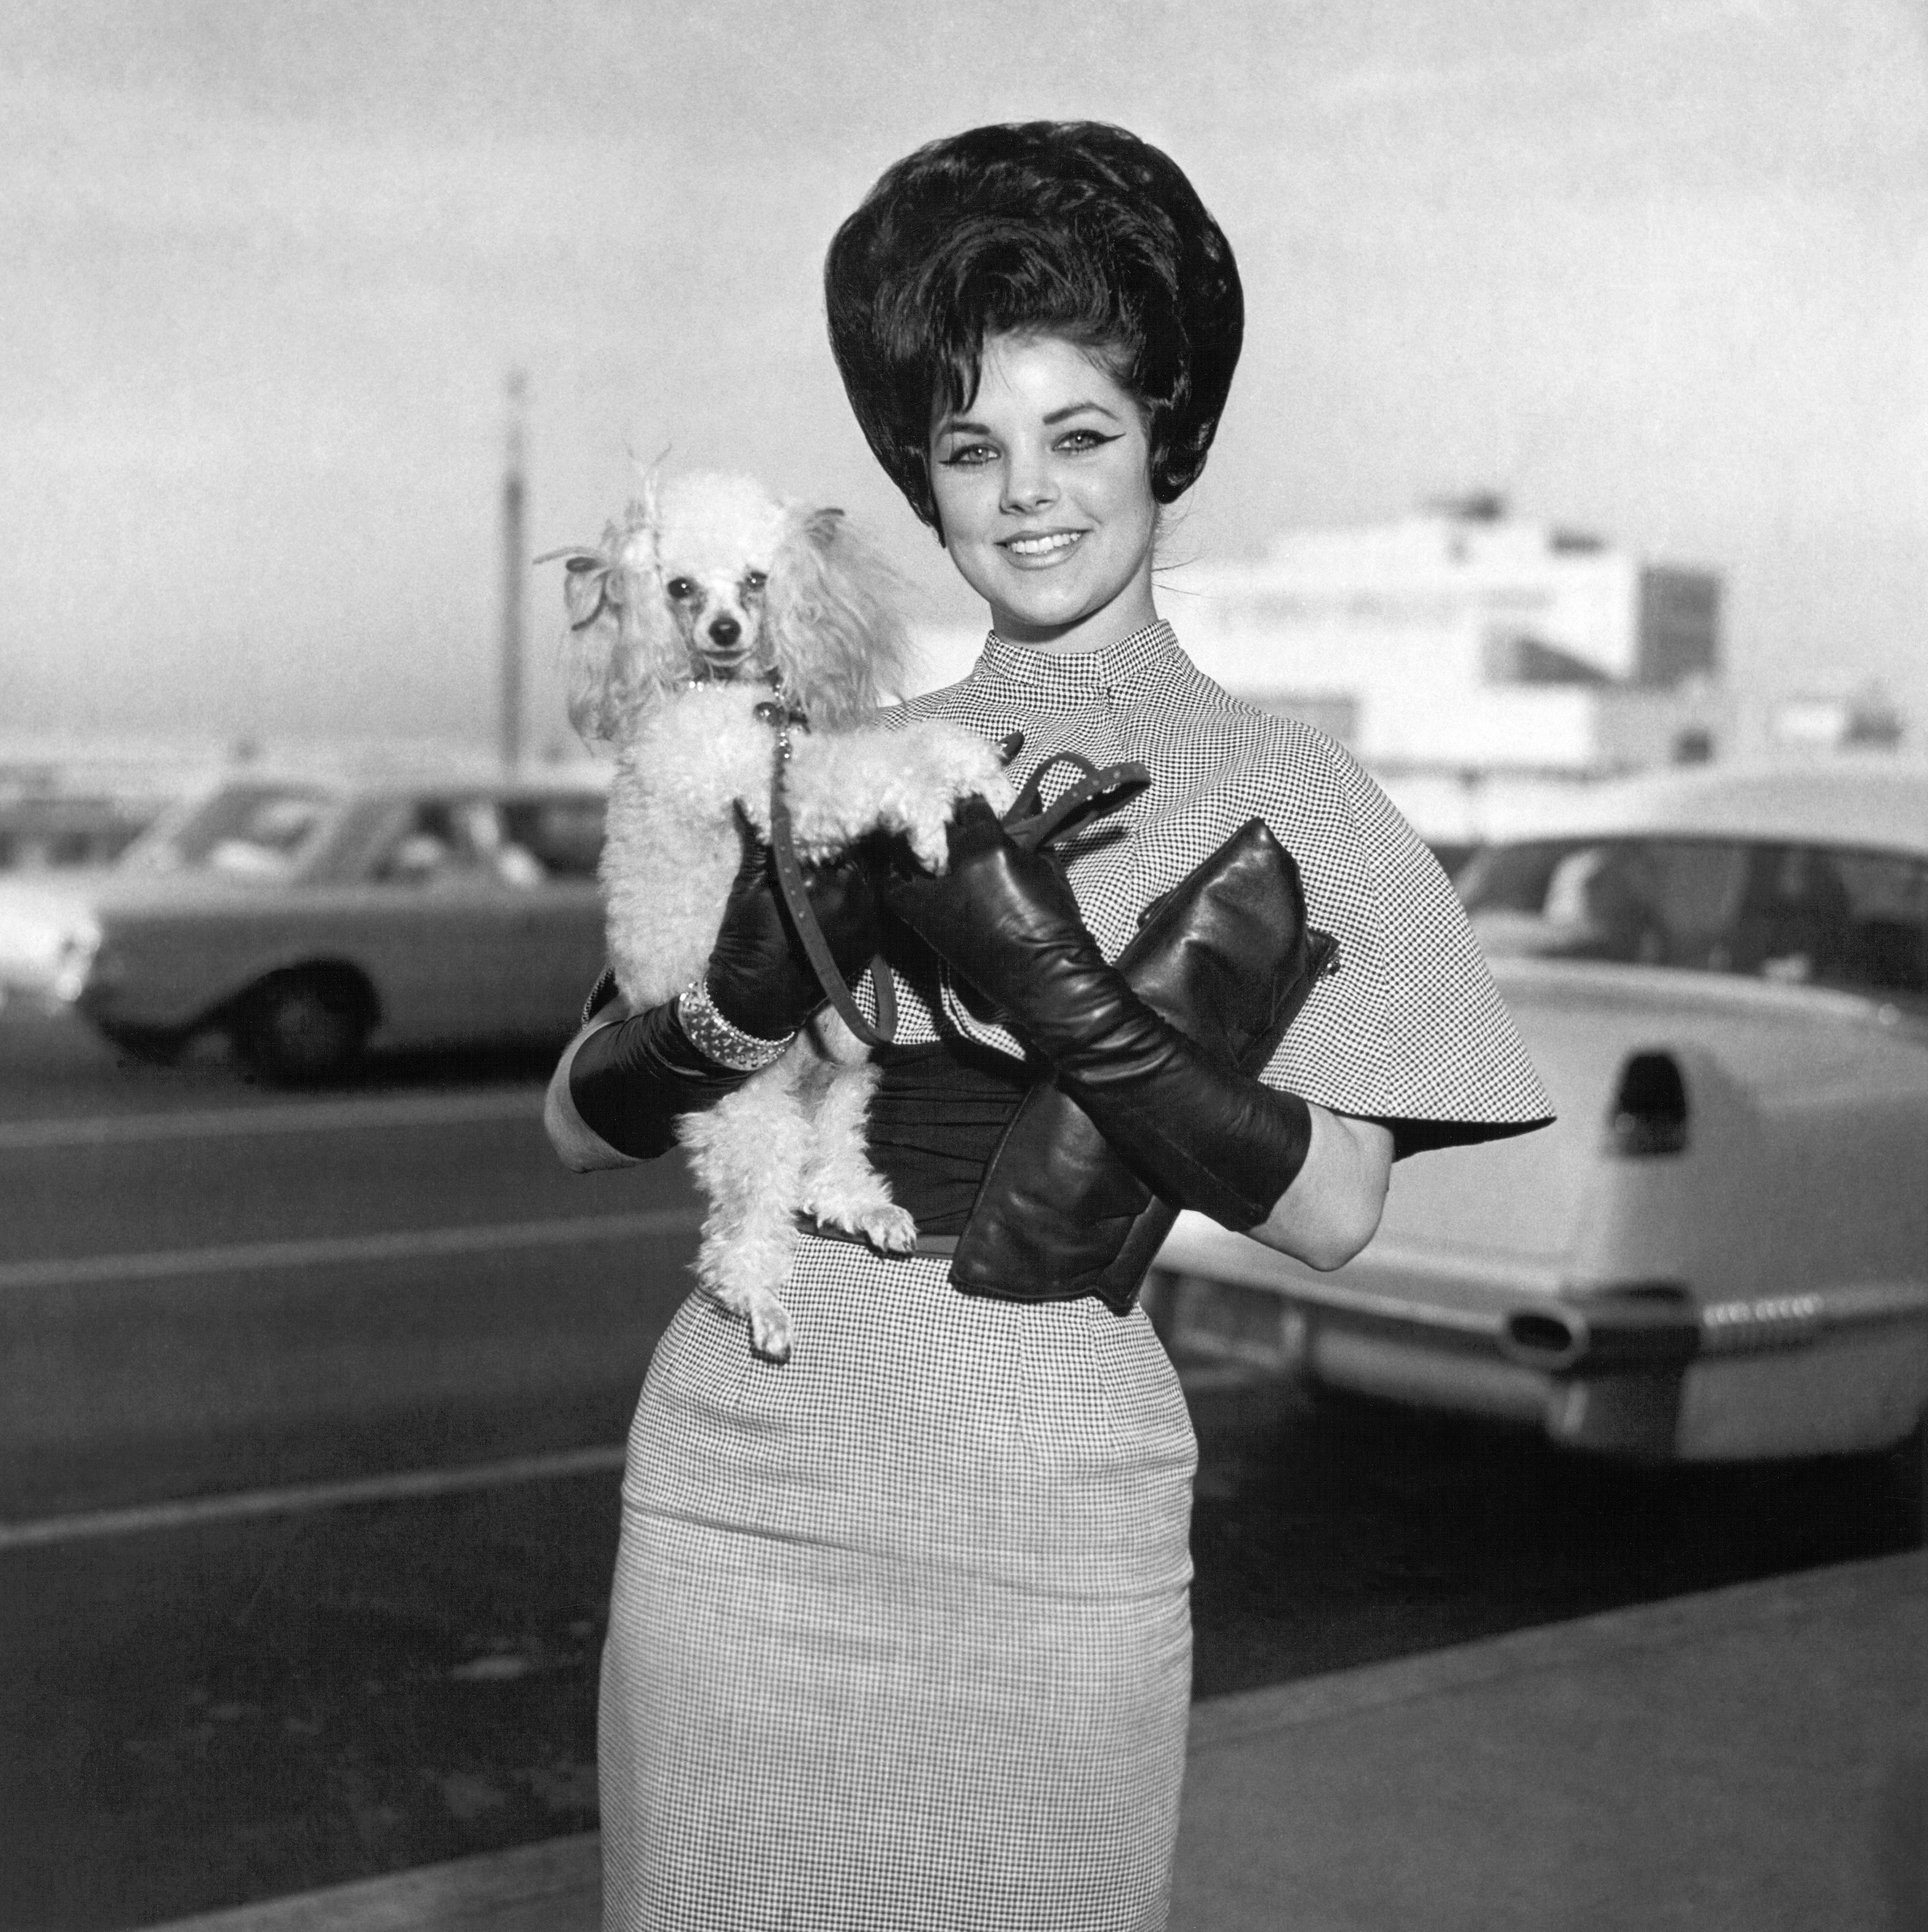 Priscilla Presley with her dog in Memphis, Tennessee in 1963 | Source: Getty Images